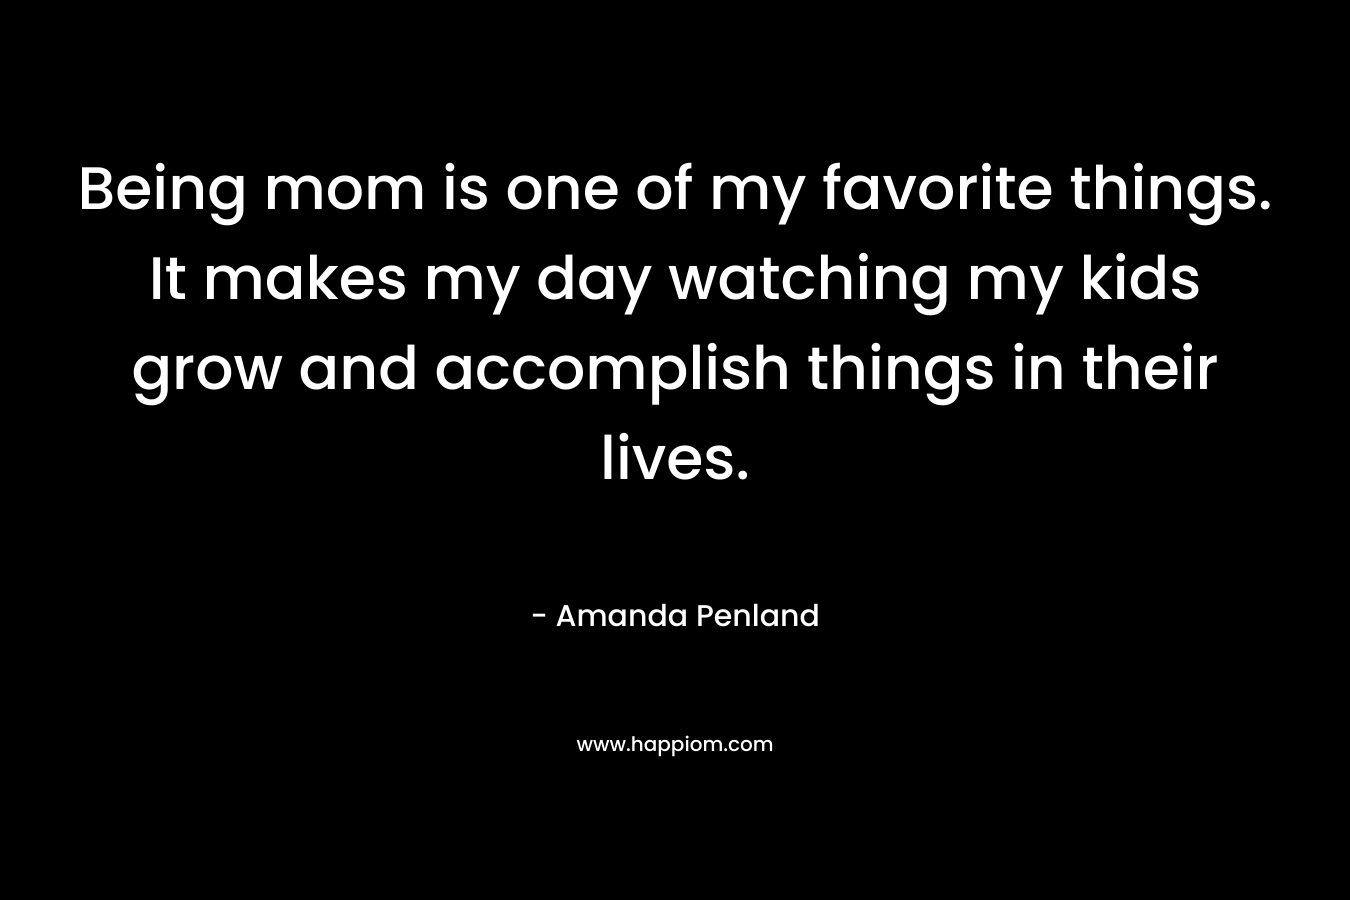 Being mom is one of my favorite things. It makes my day watching my kids grow and accomplish things in their lives. – Amanda Penland